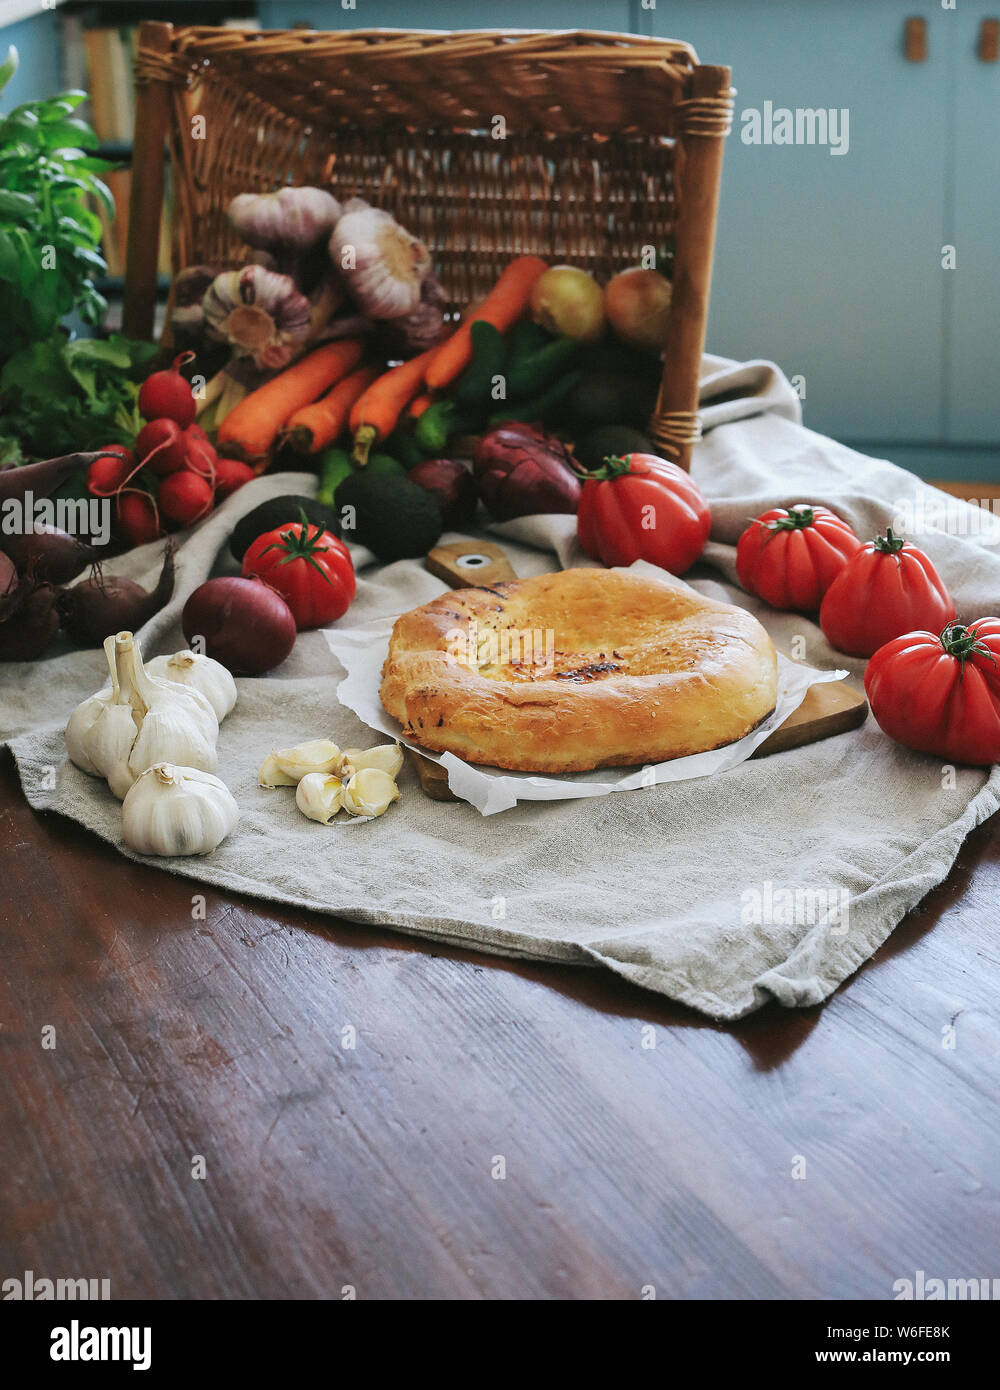 Homemade bread and vegetables Stock Photo